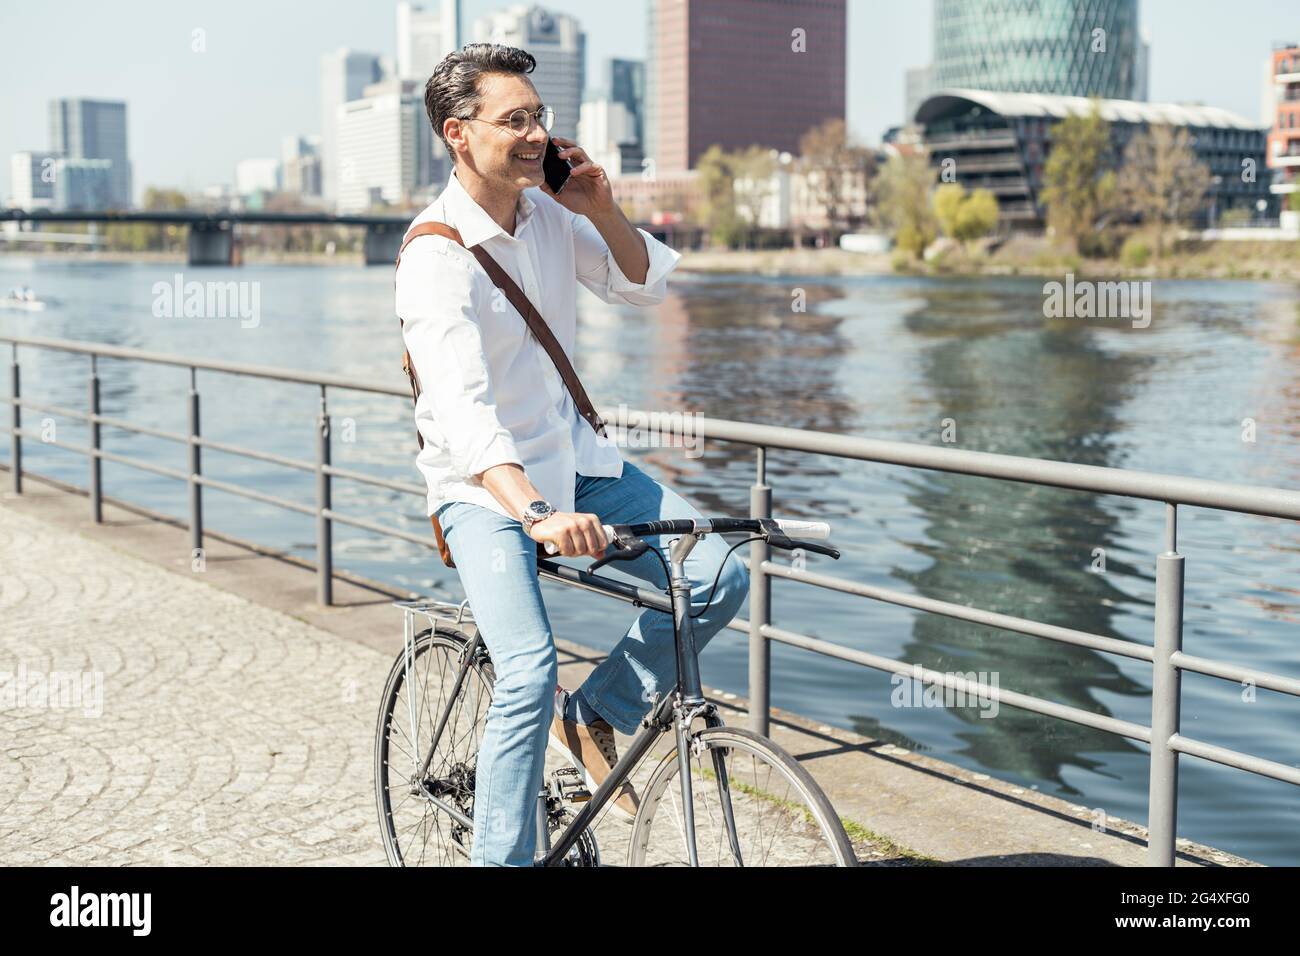 Smiling businessman cycling while talking on mobile phone by river in city Stock Photo